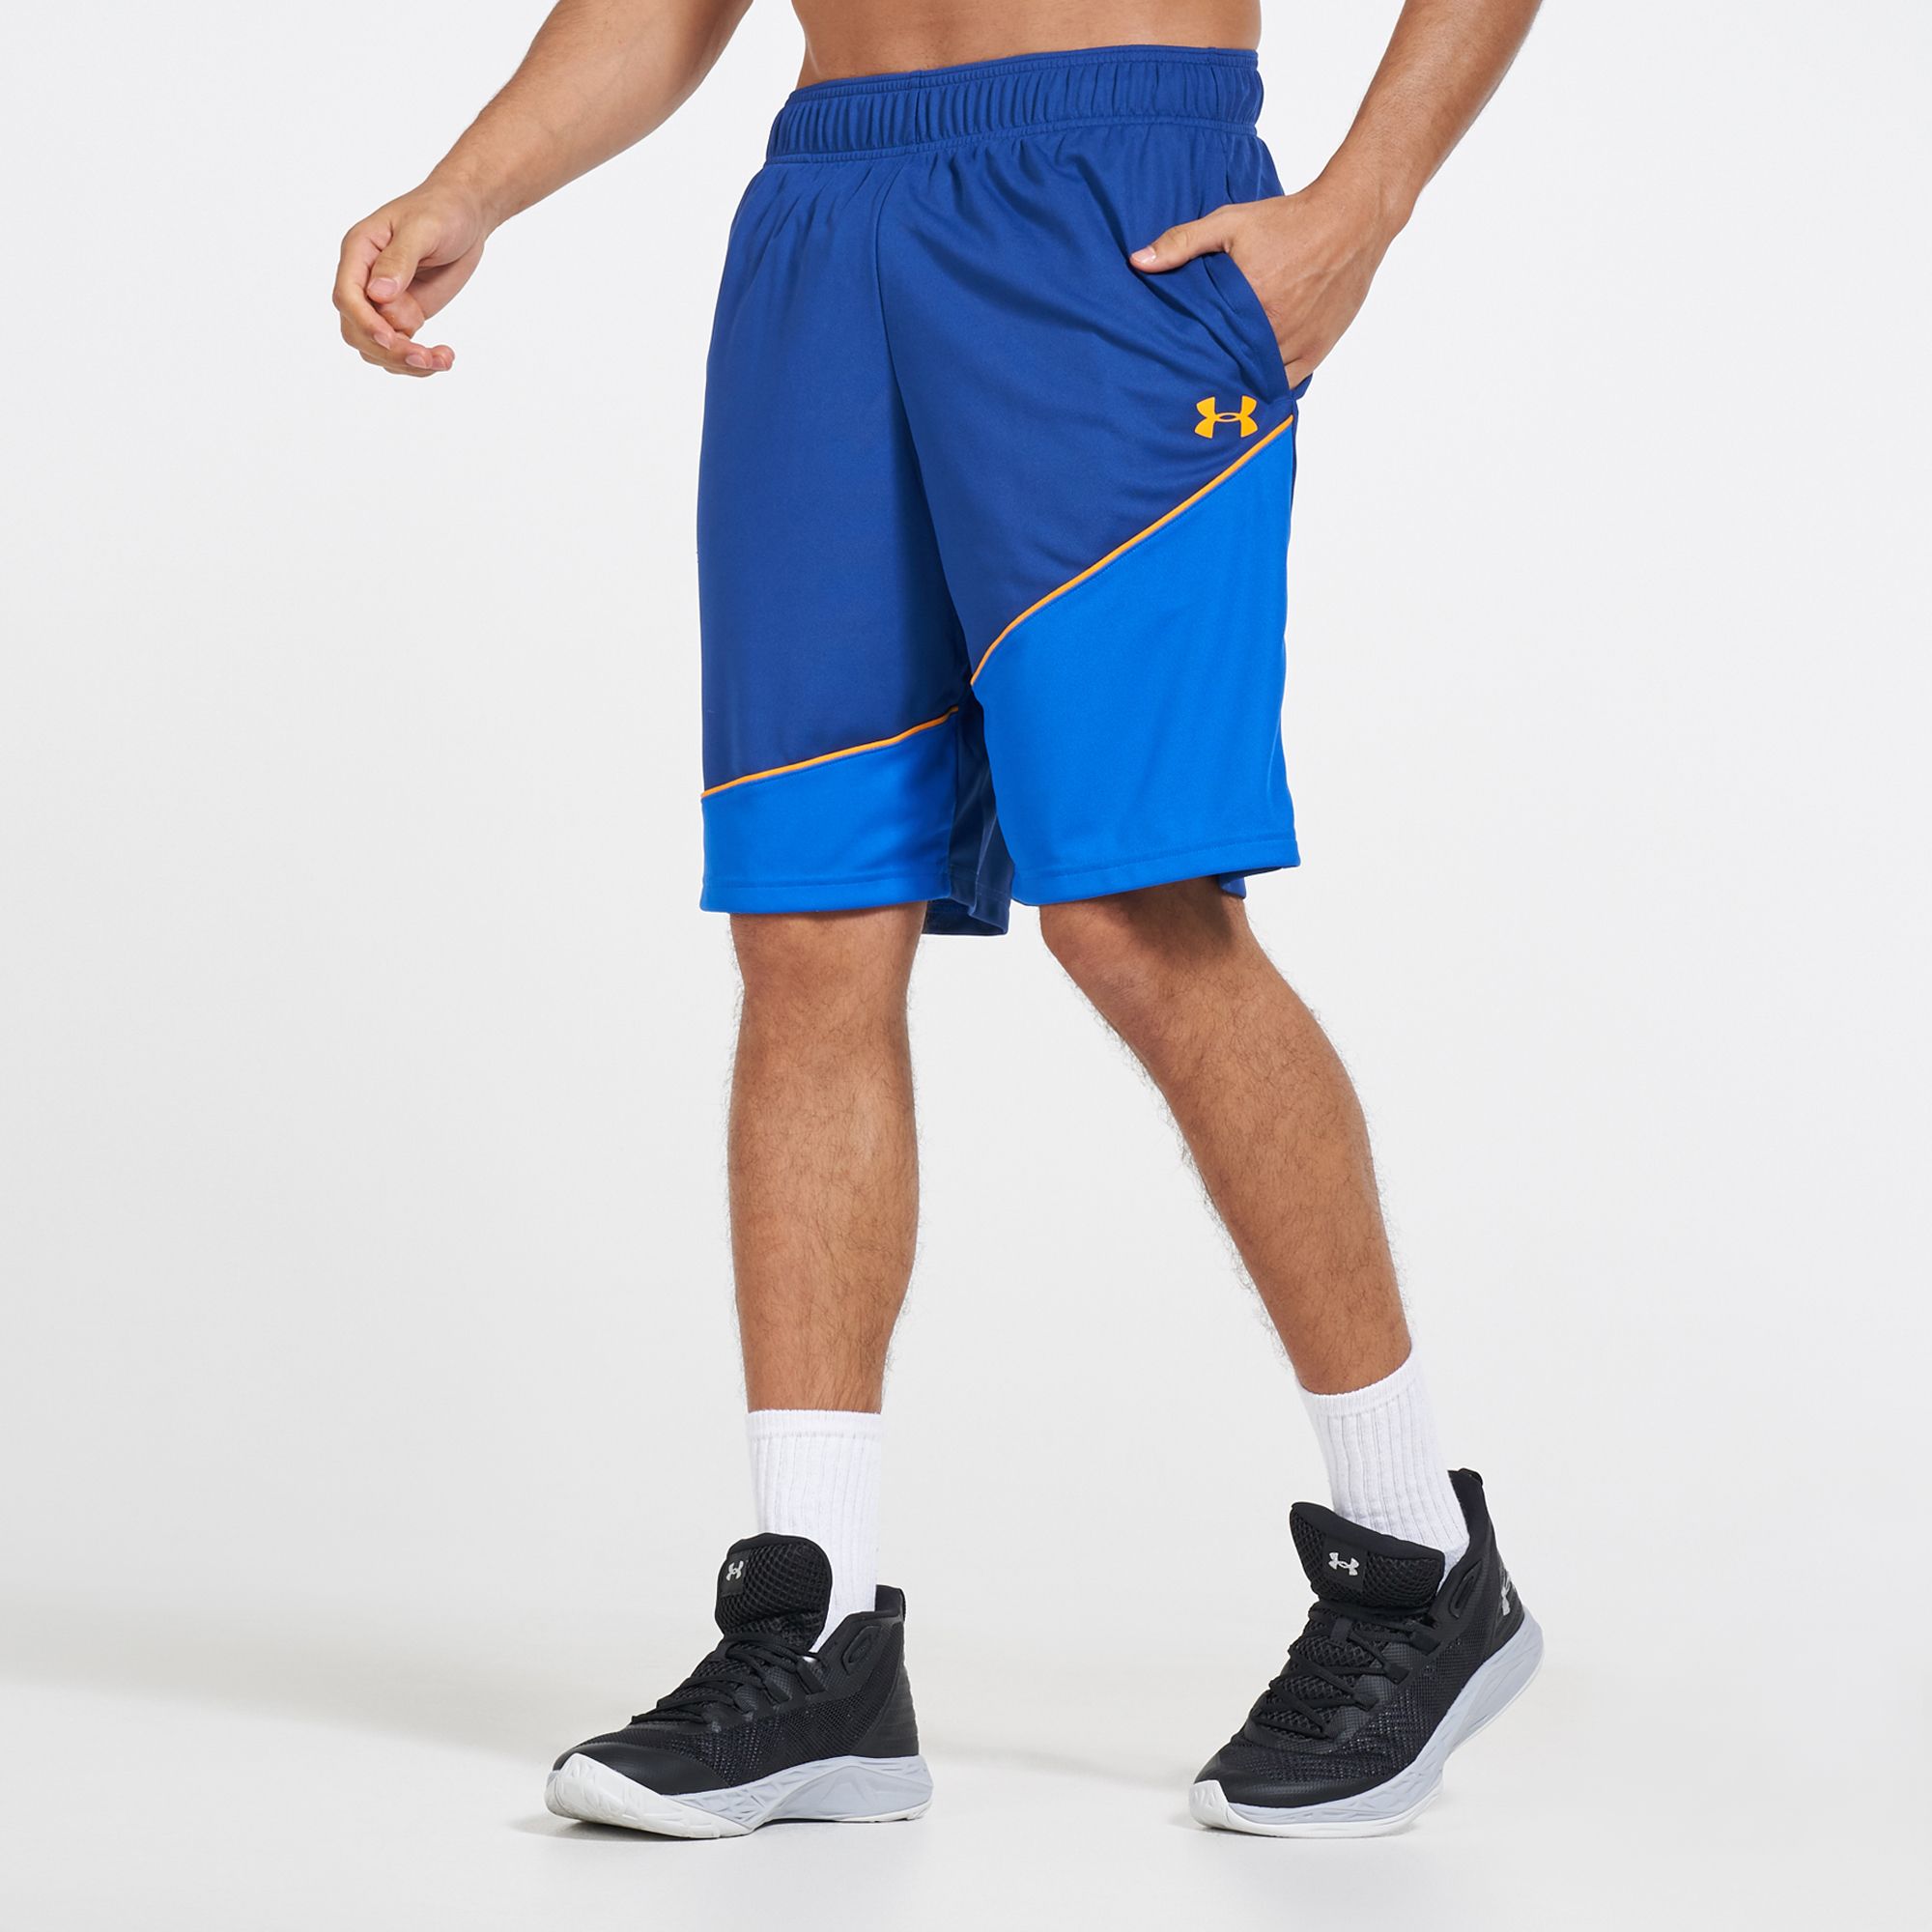 under armour 10 inch shorts